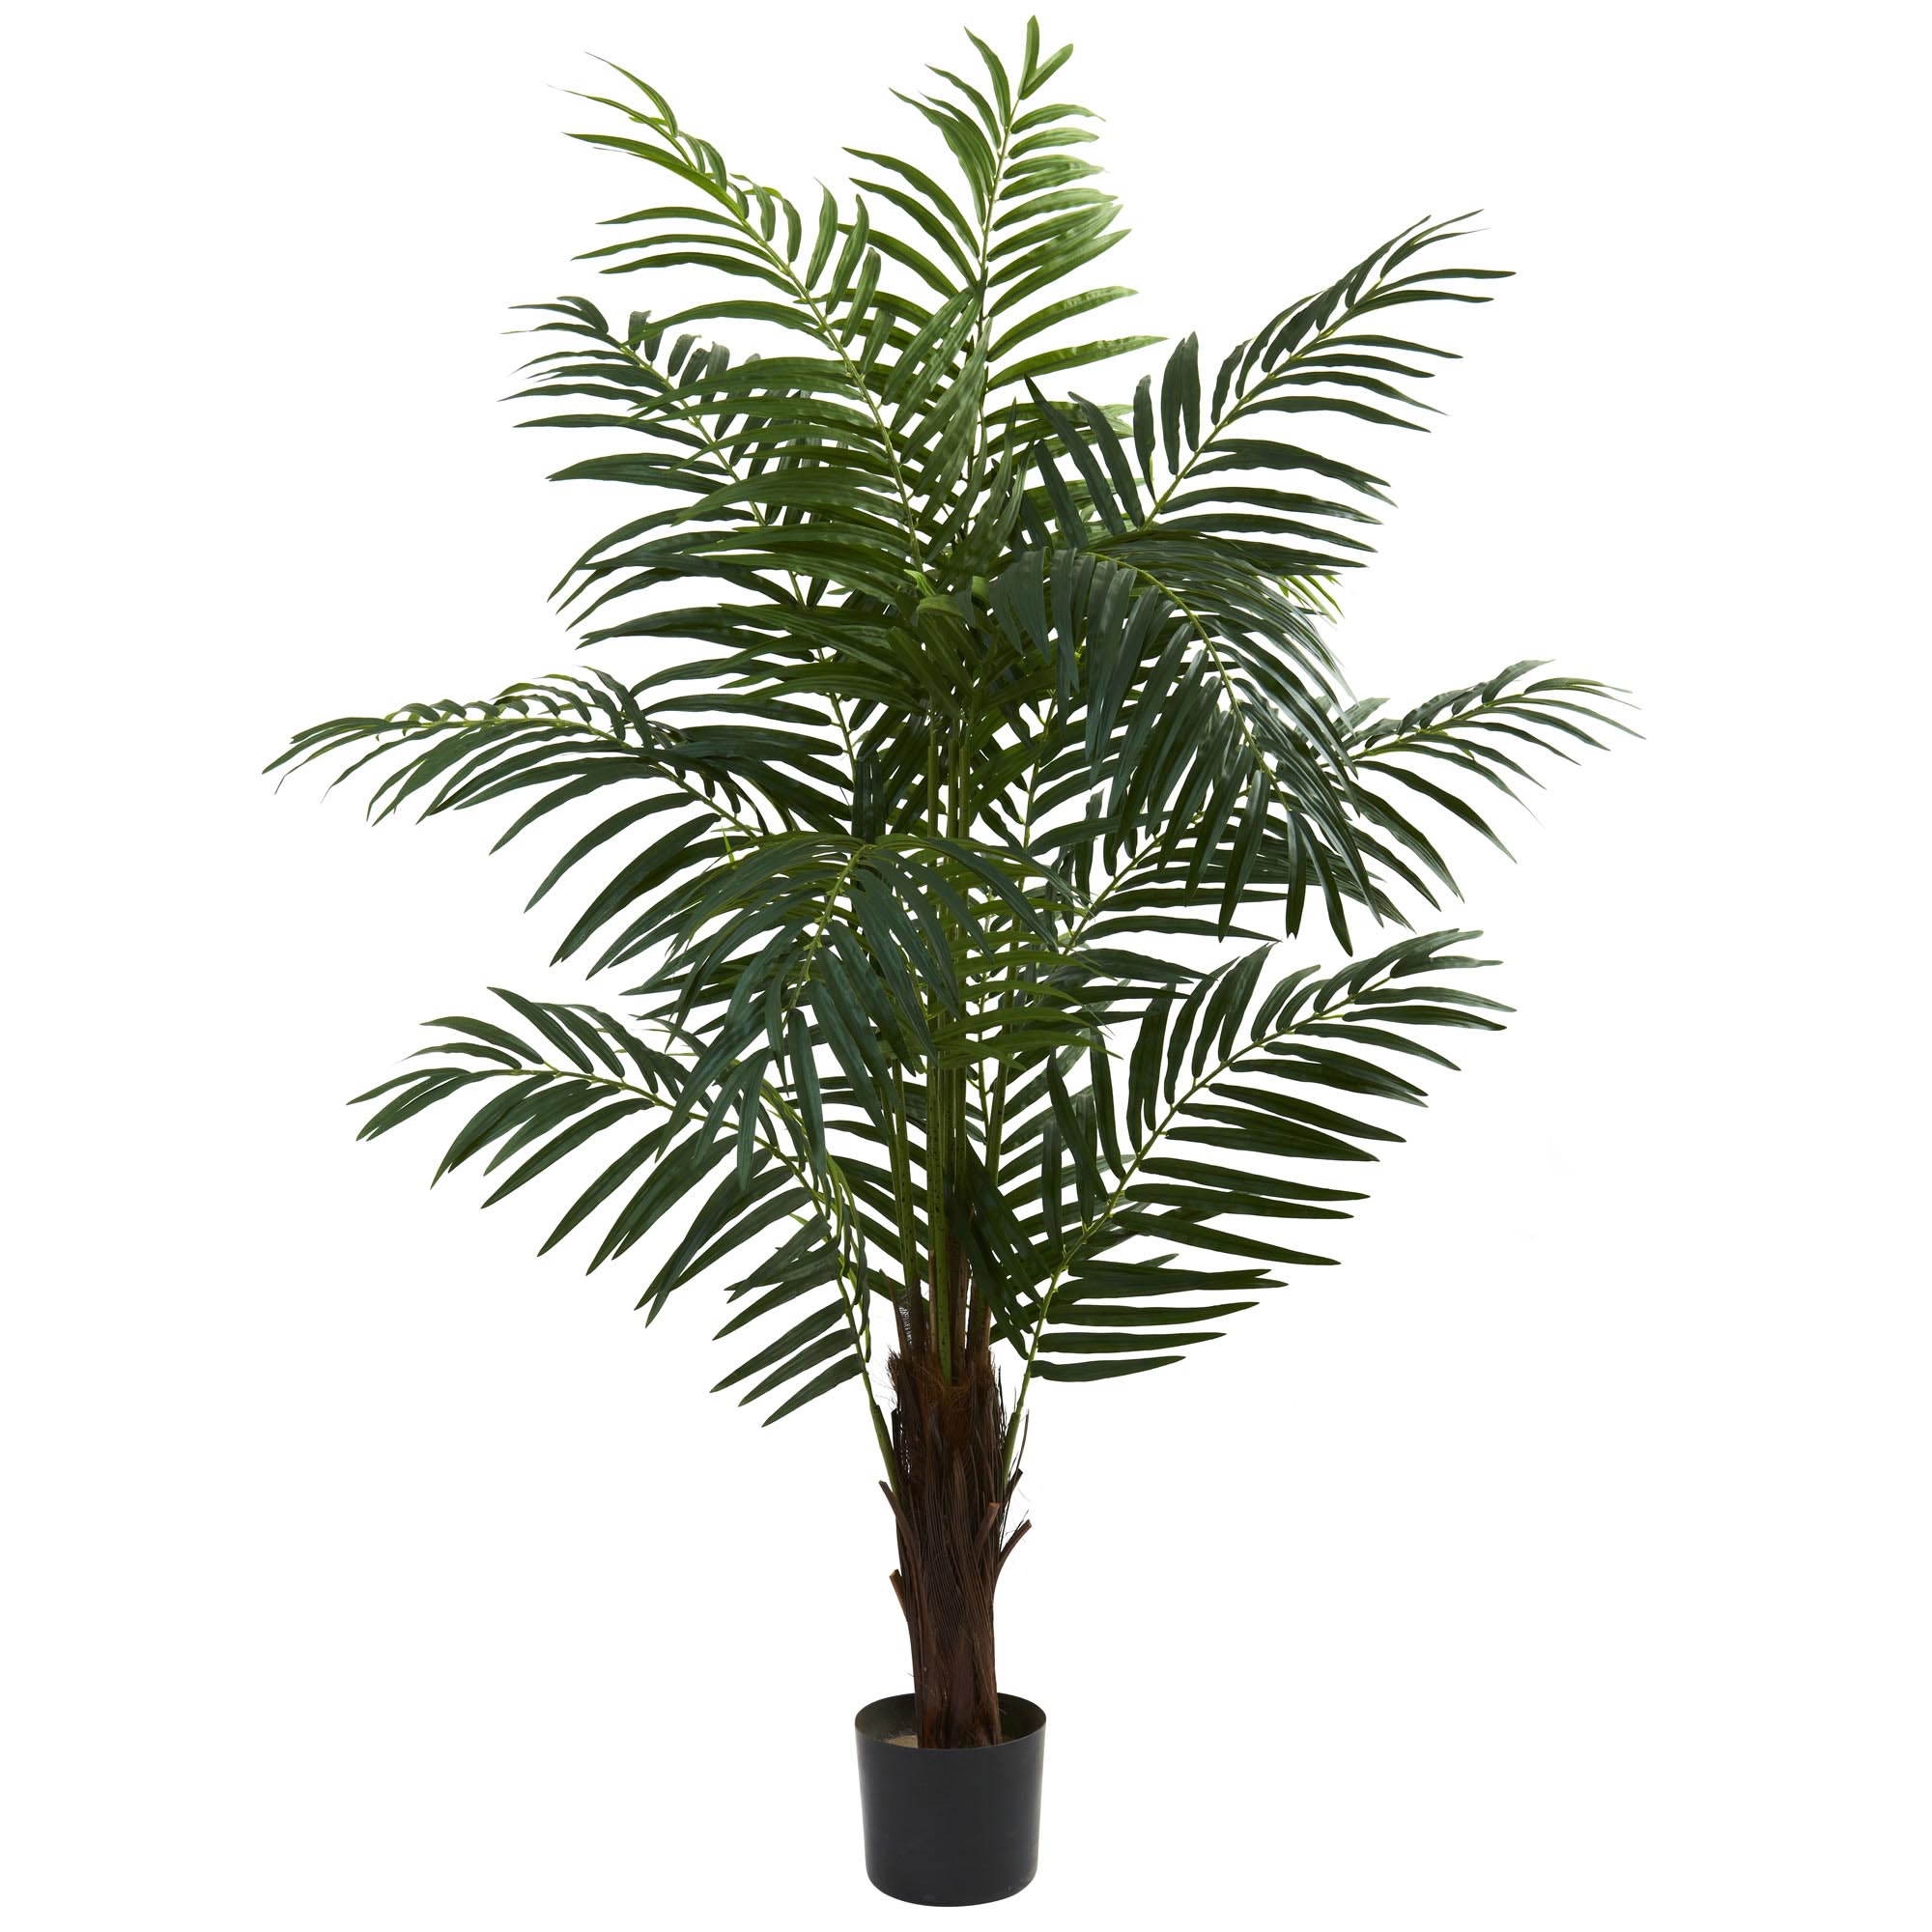 5 foot Artificial Areca Palm Tree: Potted